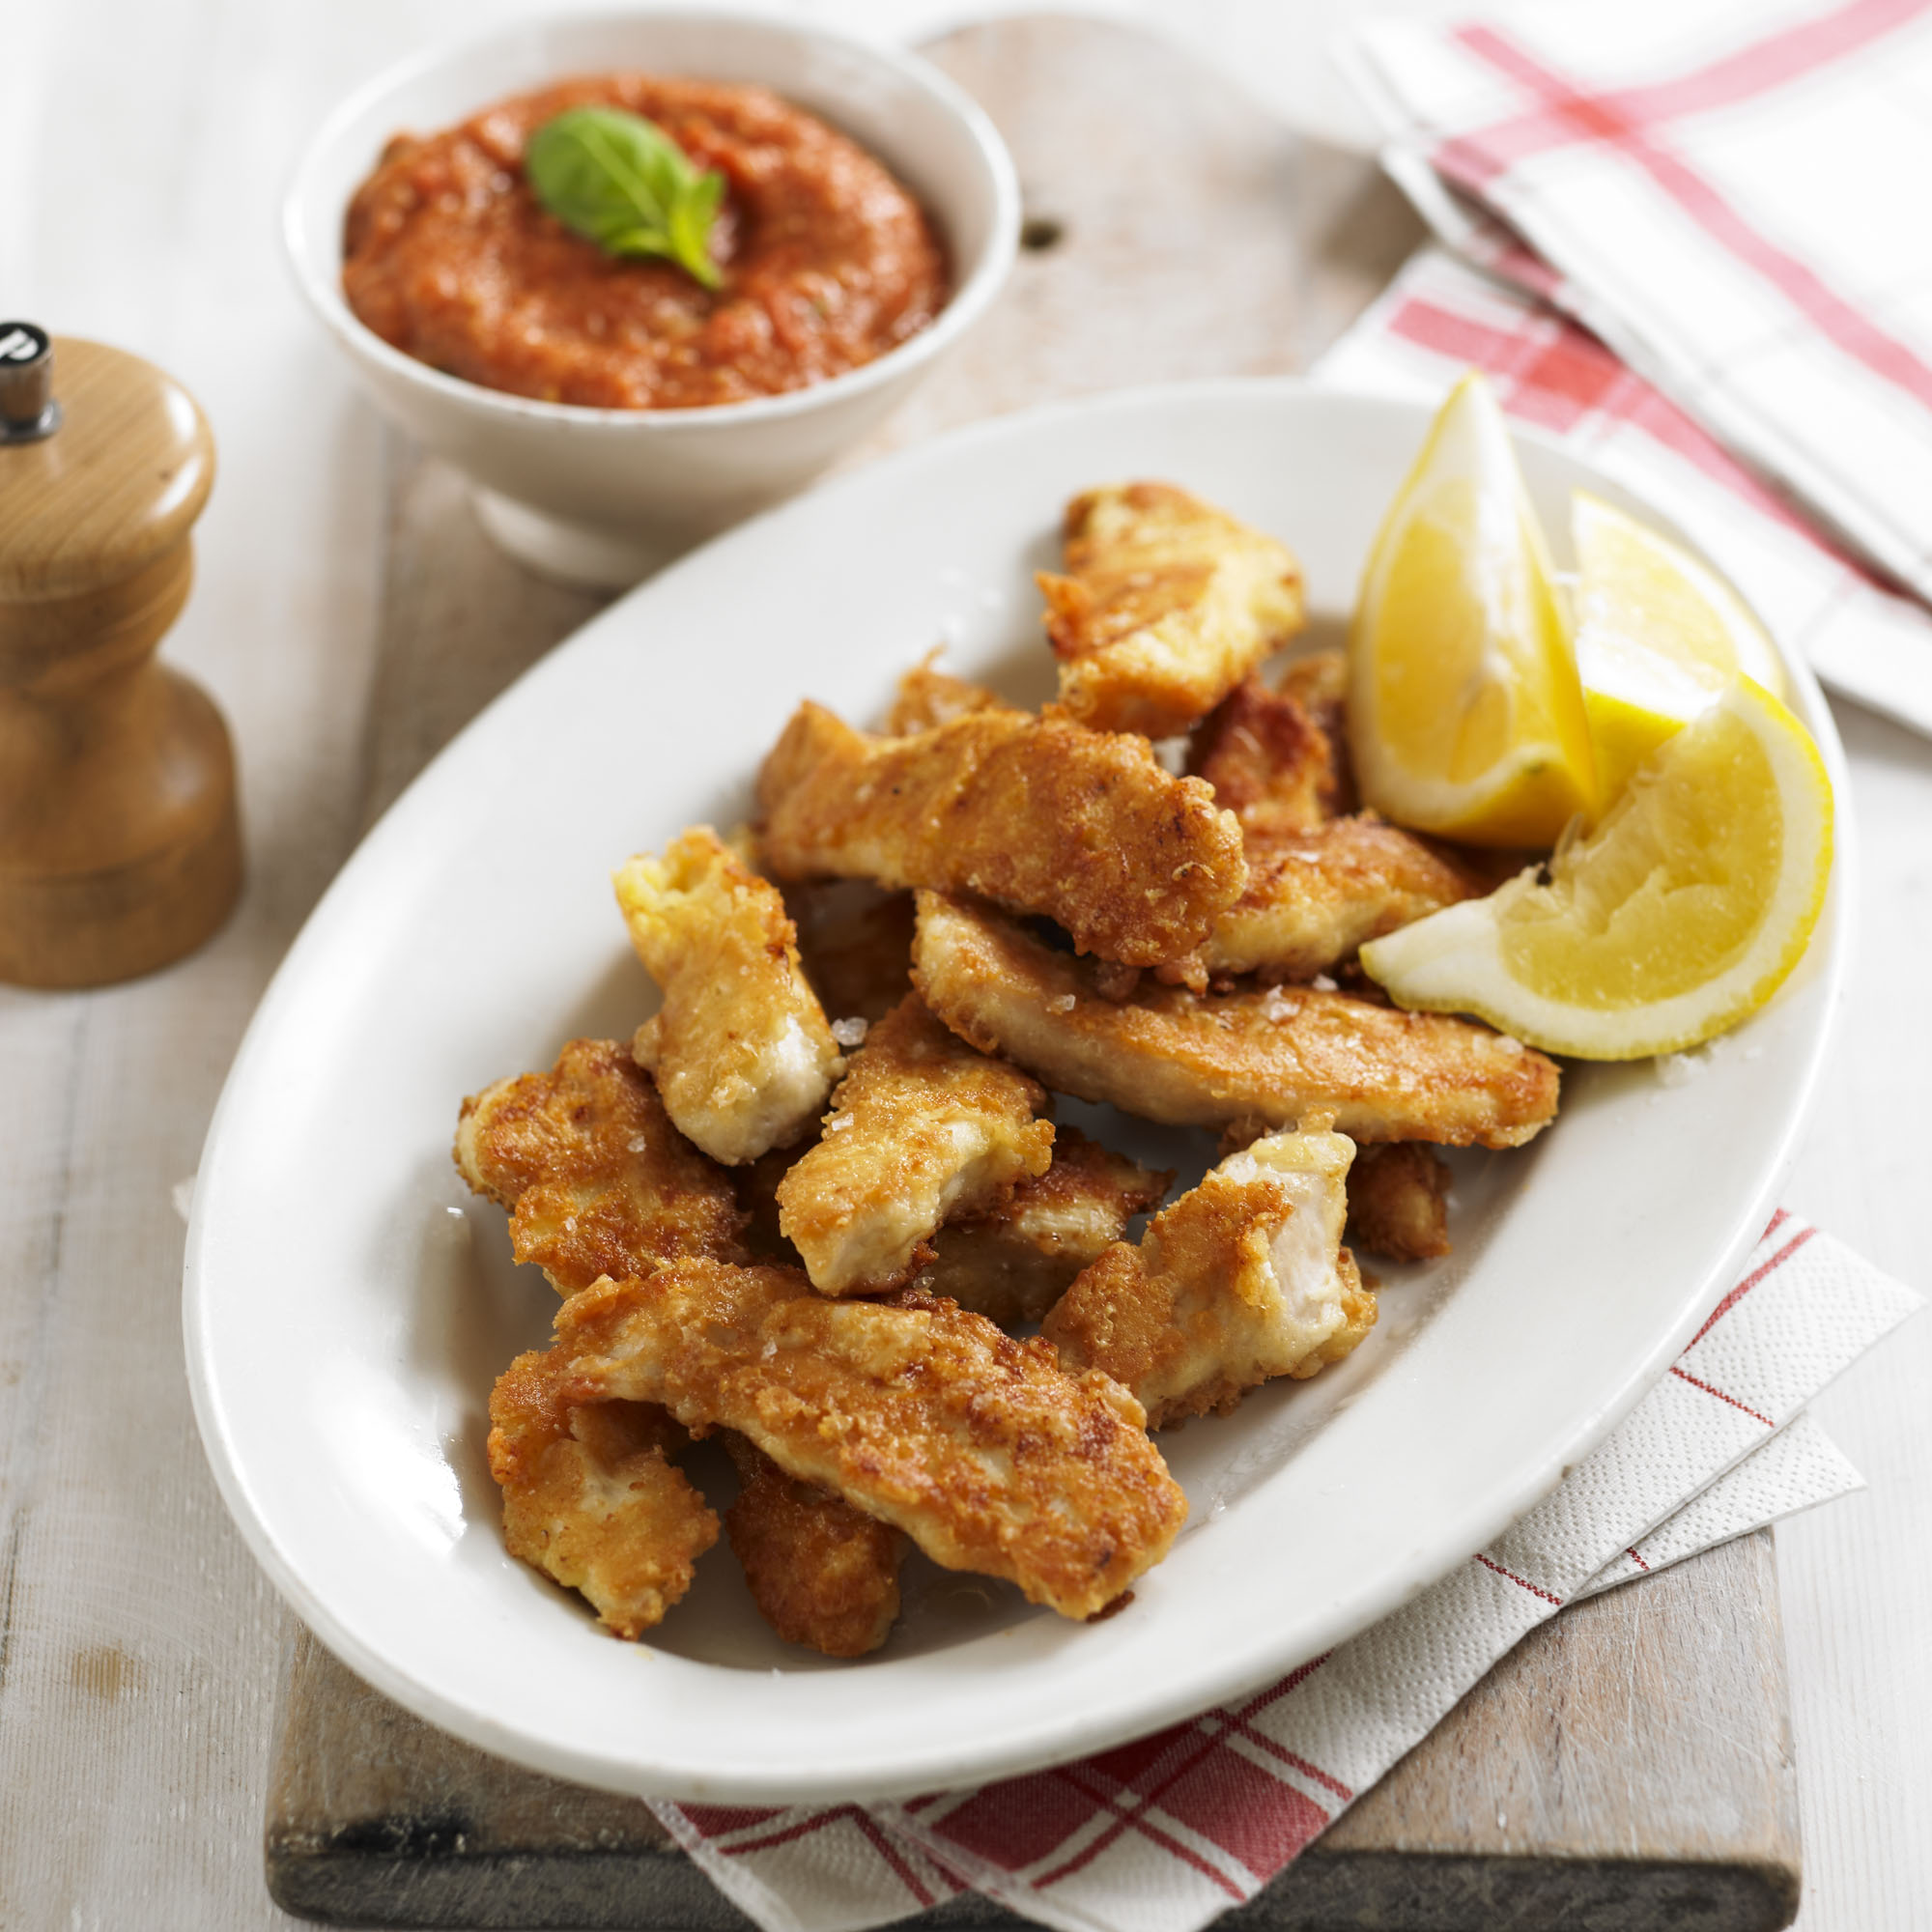 Parmesan Chicken Strips with Roasted Tomato and Garlic Dipping Sauce Recipe